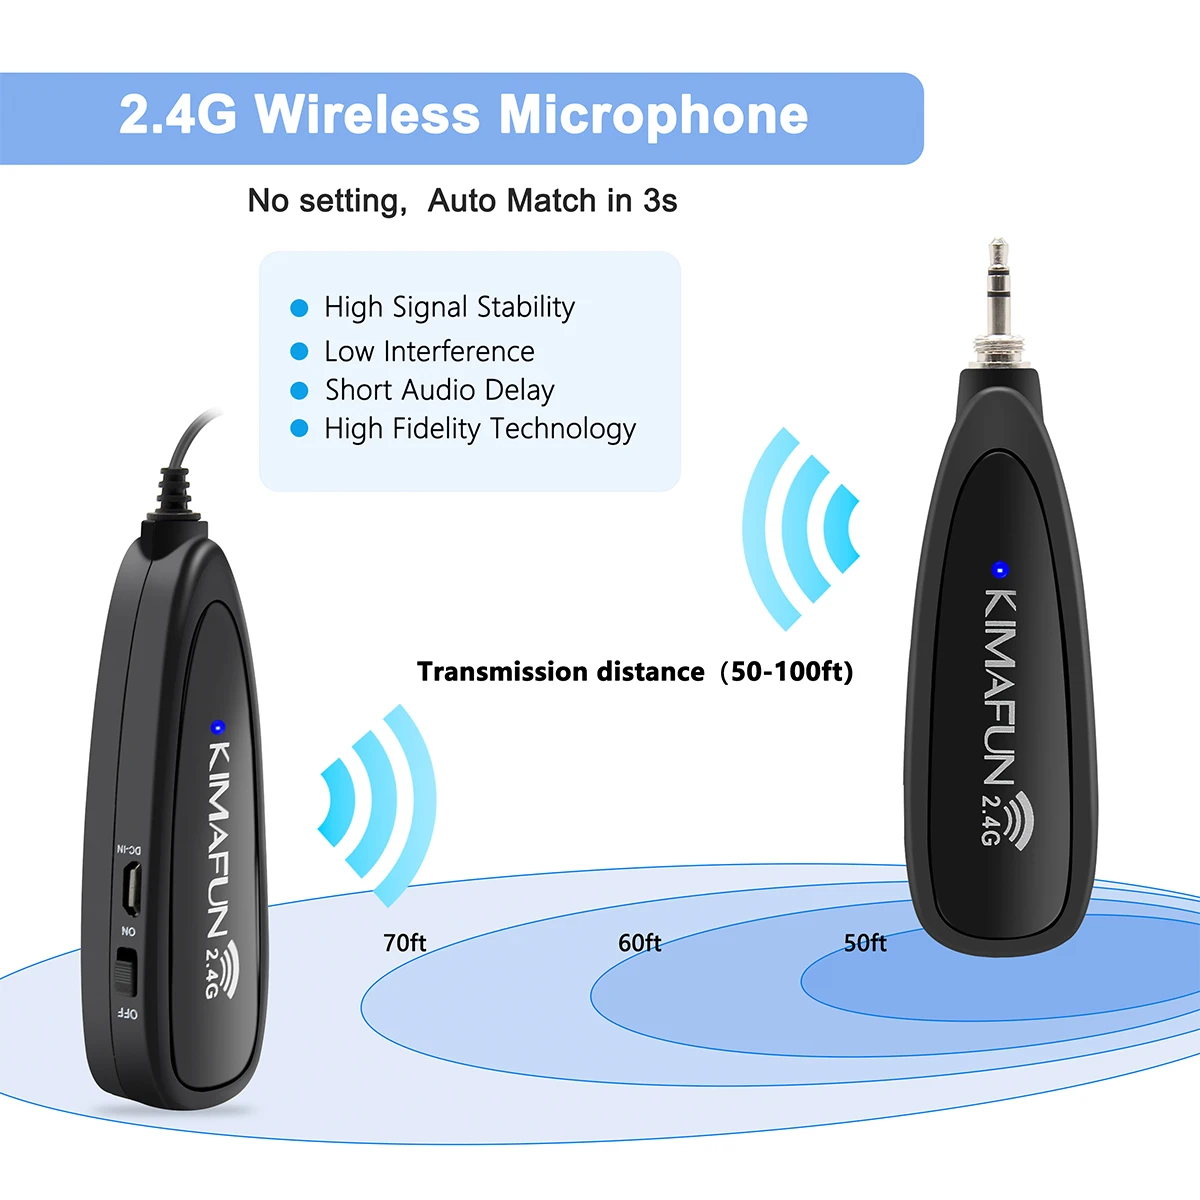 KIMAFUN 2.4G Wireless Microphone System,Headset and Handheld 2 in 1 for Voice Amplifier,Recording,Speaking,Online Chatting